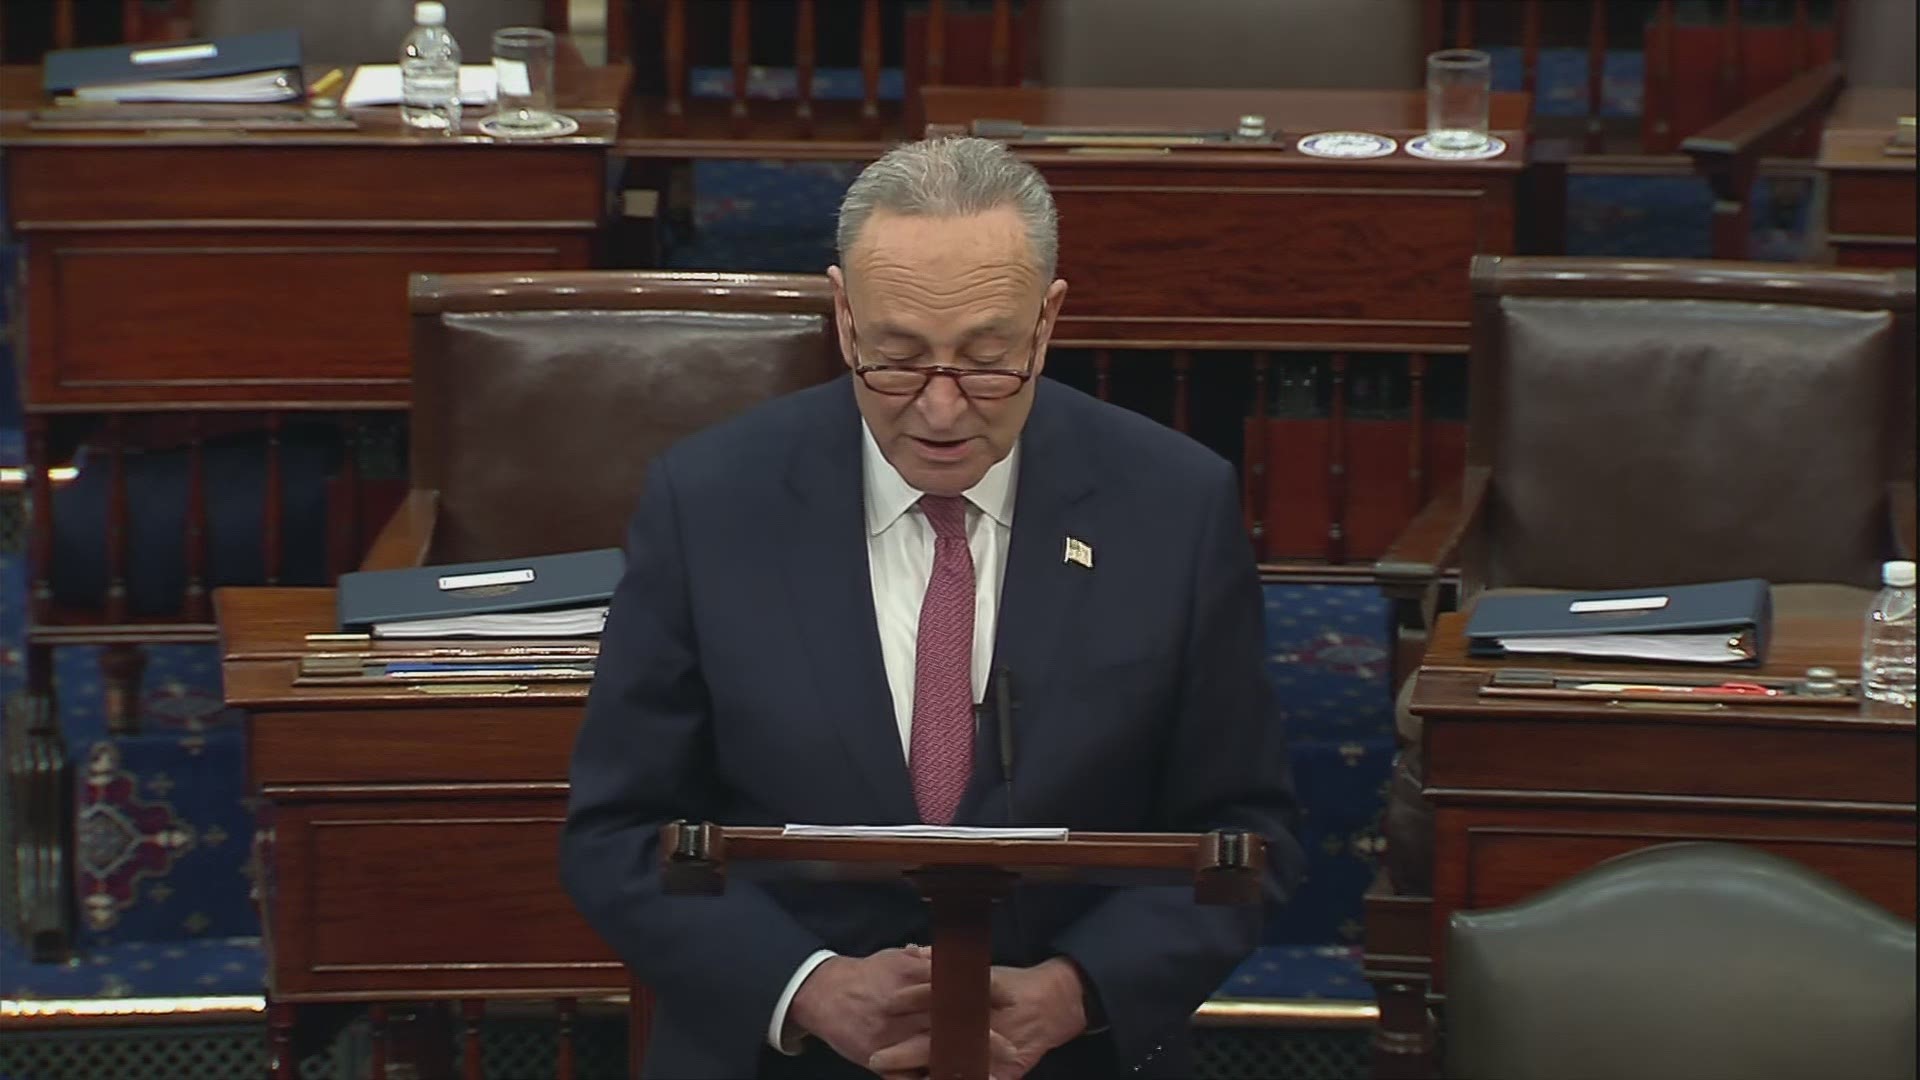 Senate Majority Leader Chuck Schumer blasted the 43 Republicans who voted to acquit Trump, saying they chose the former president over country.